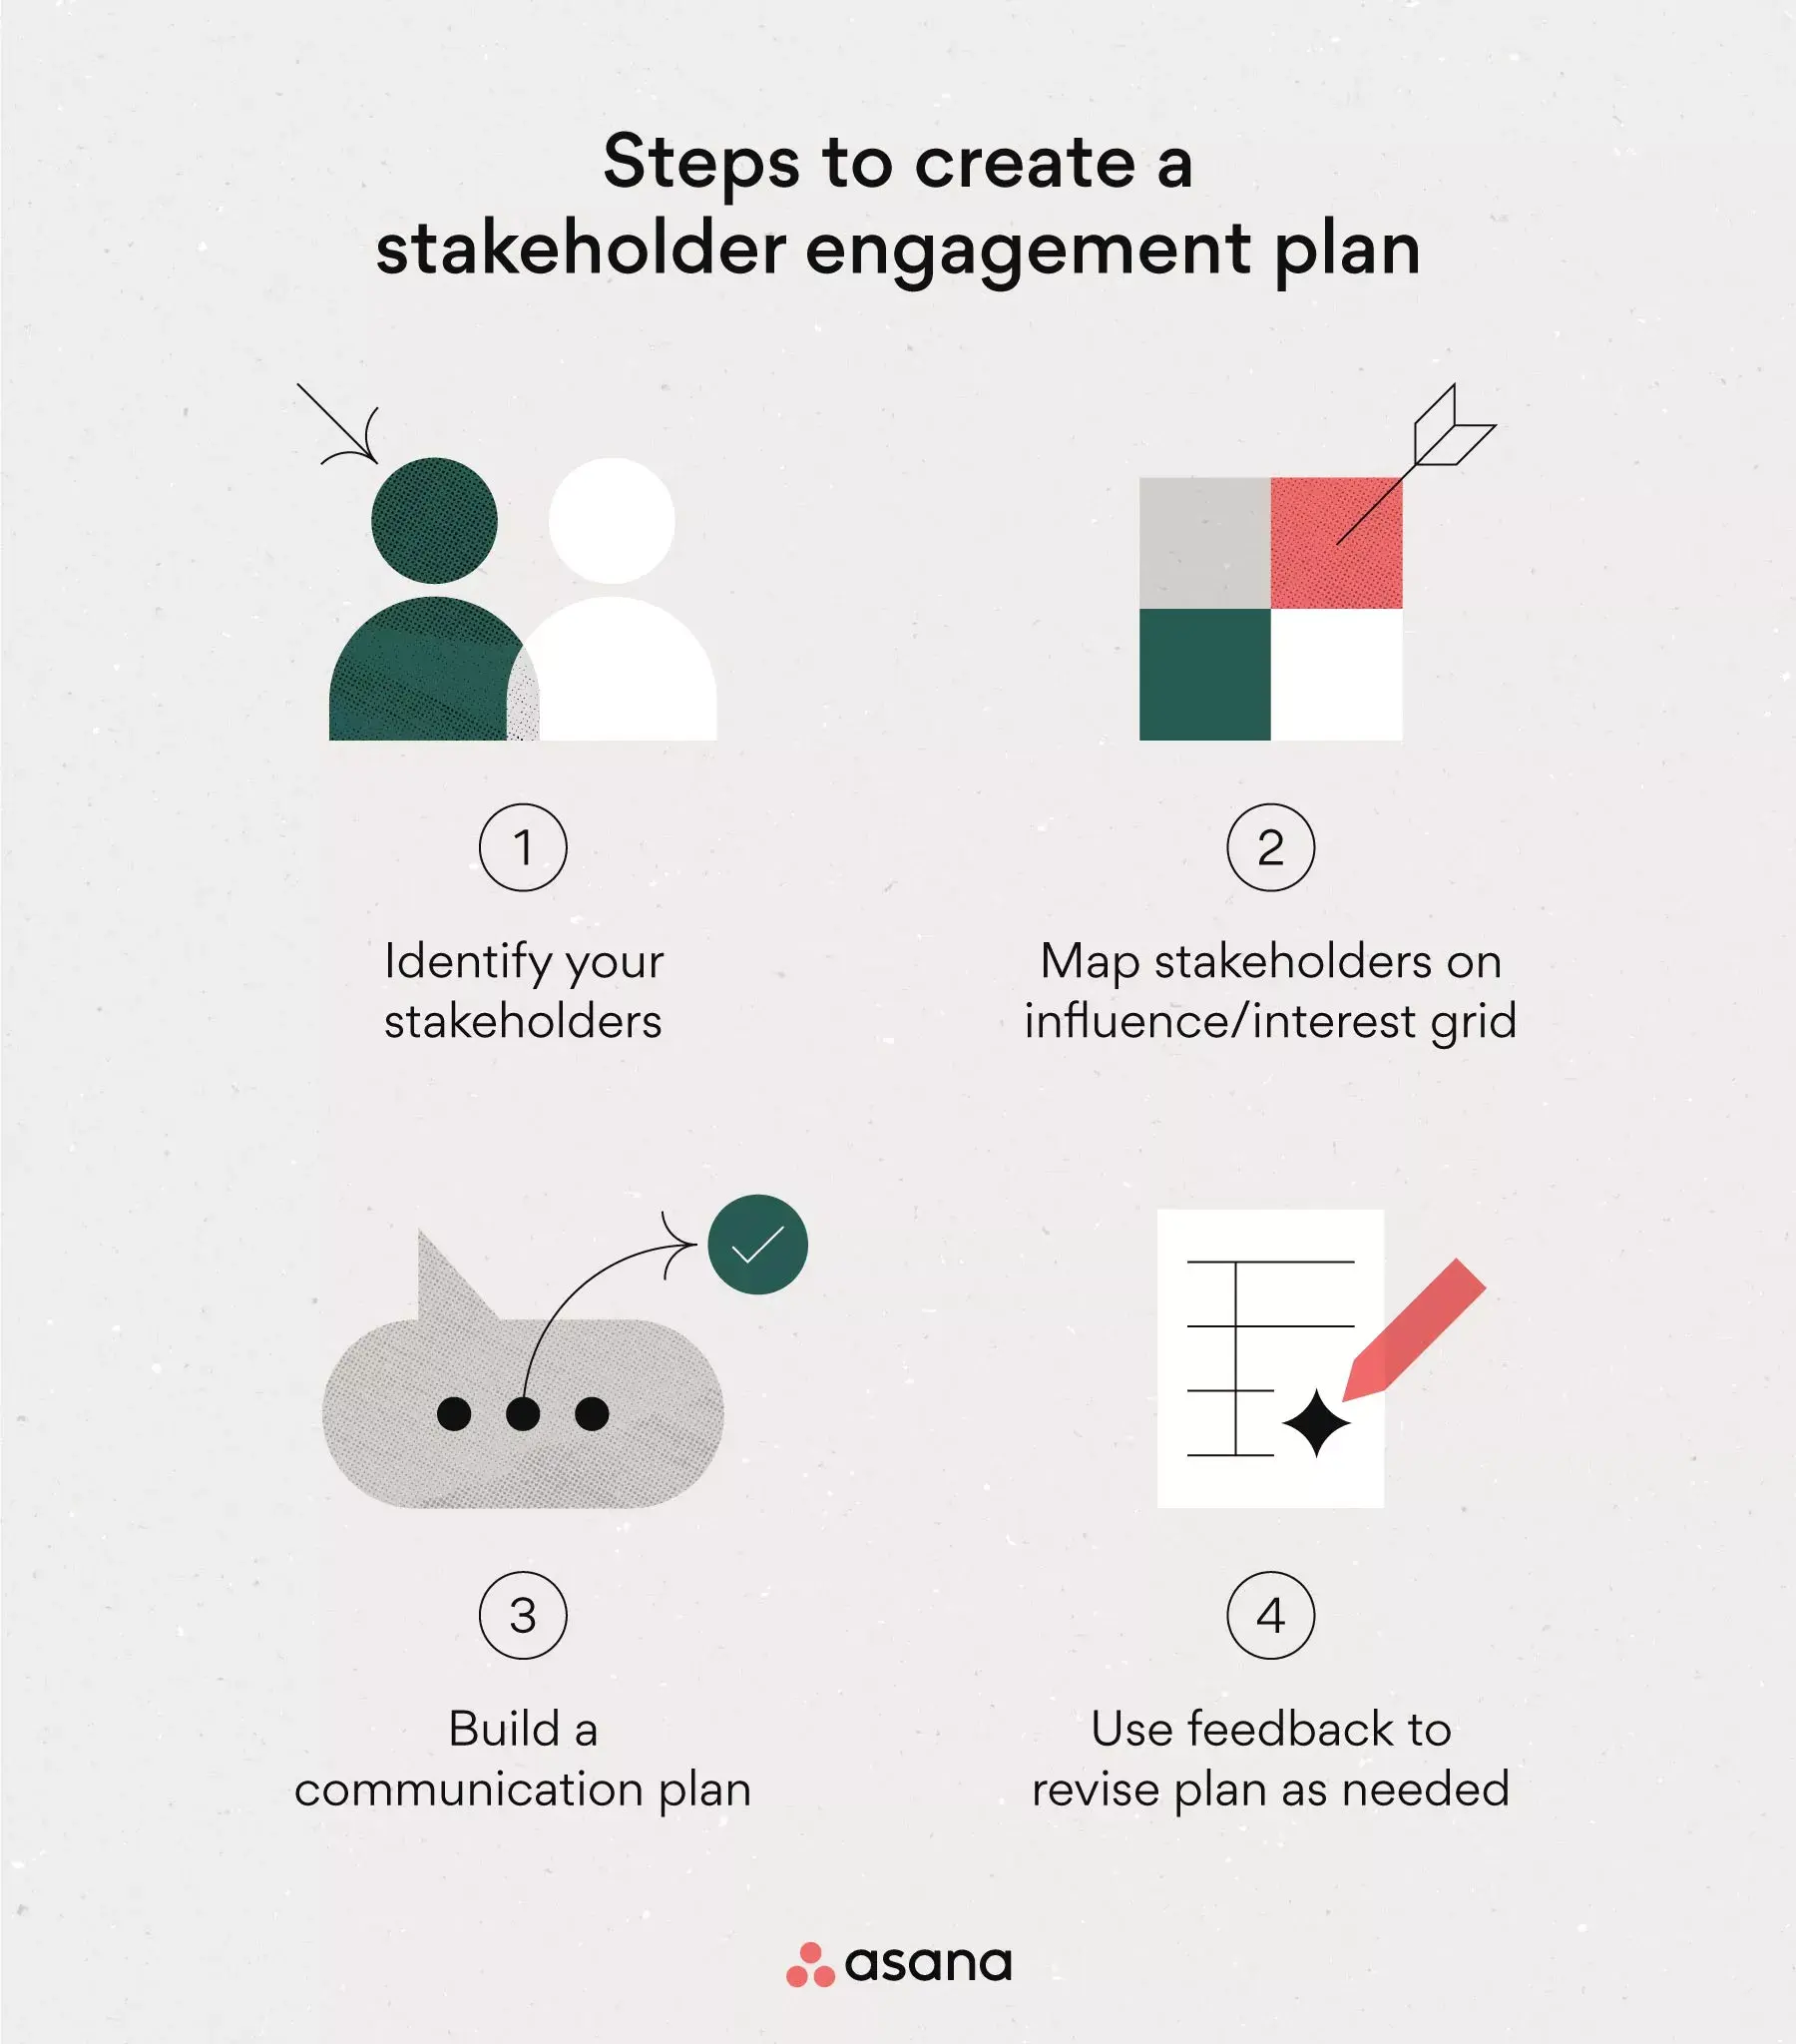 [inline illustration] steps to create a stakeholder engagement plan (infographic)